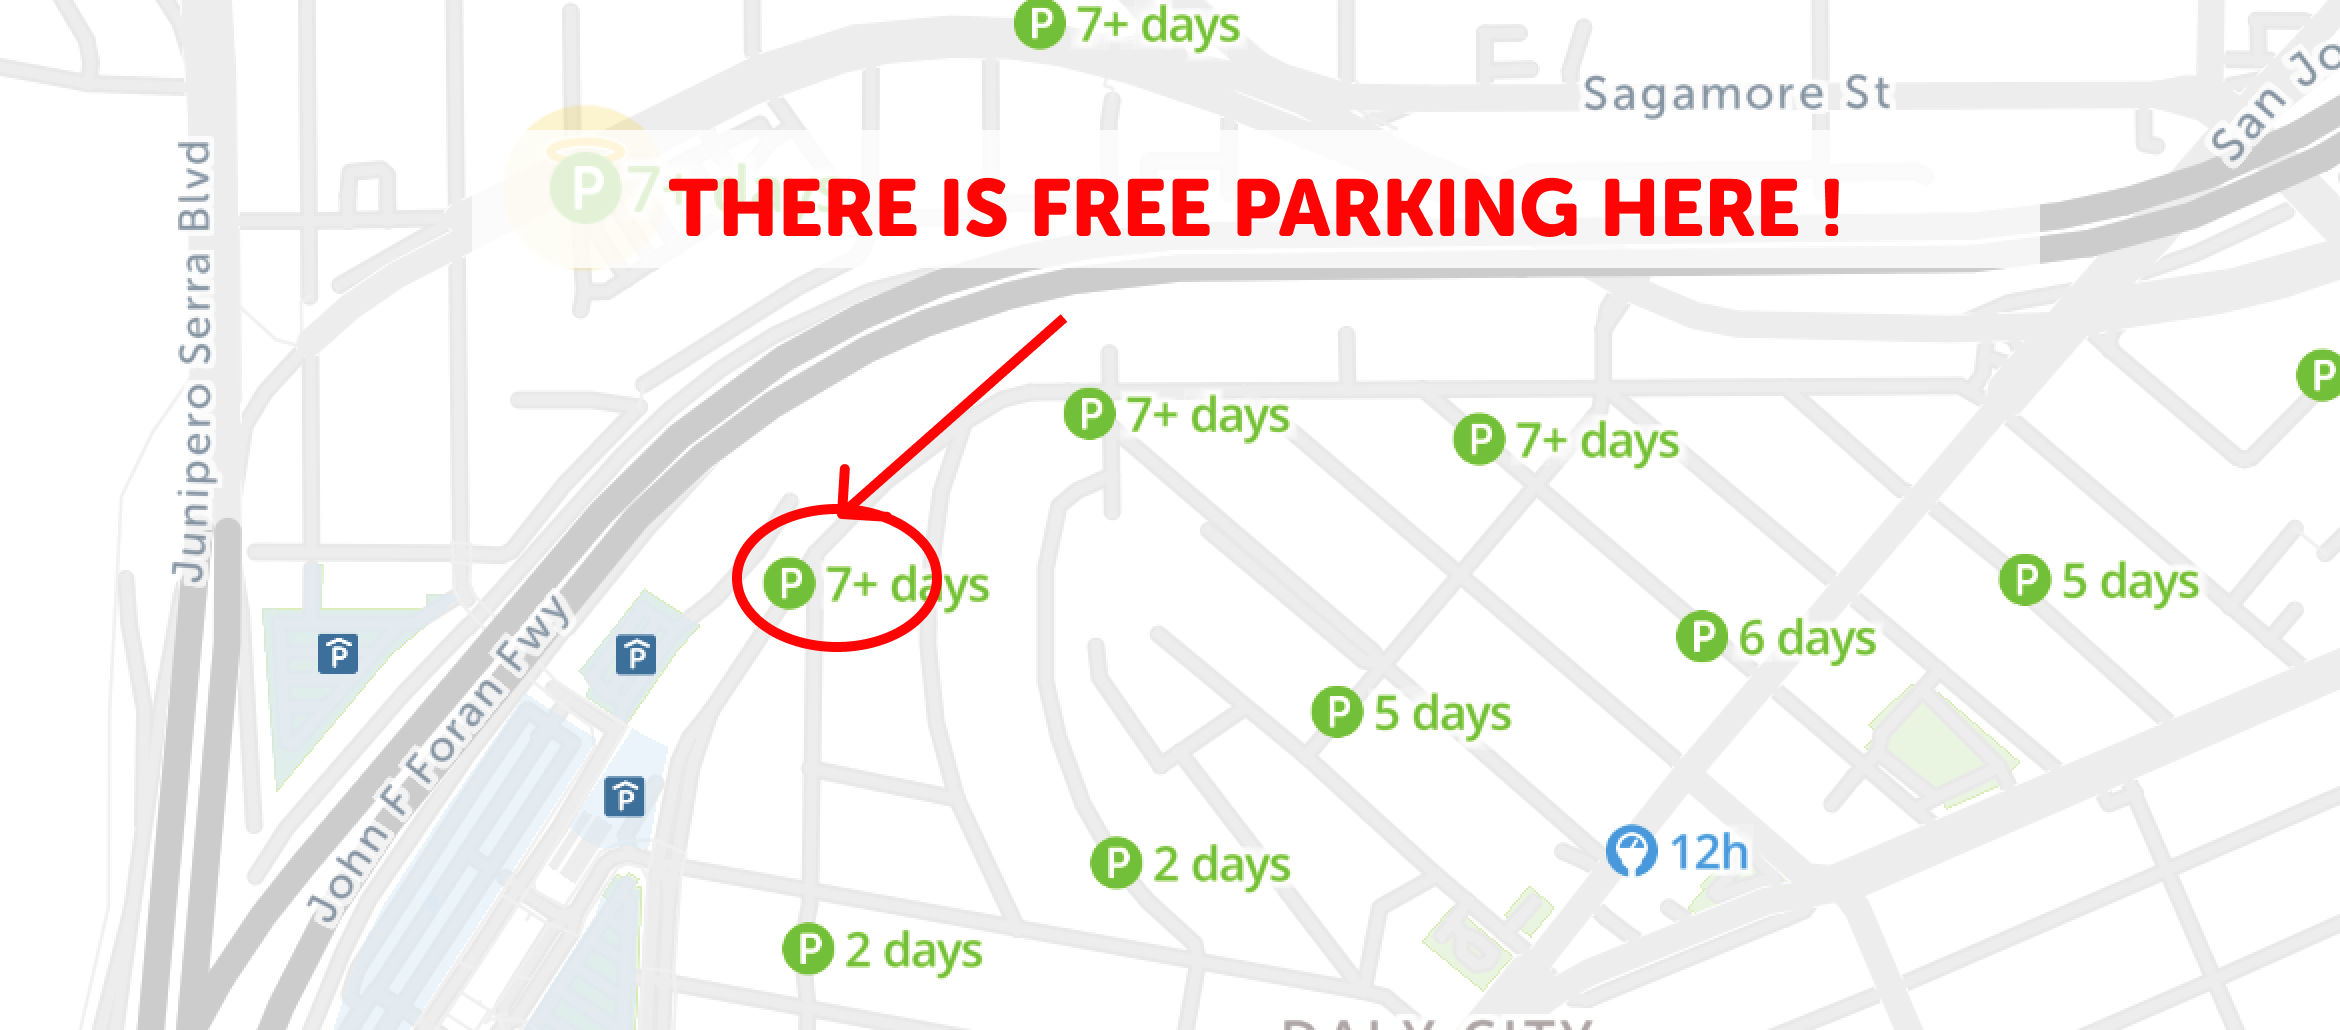 map of free parking in Daly city - SpotAngels